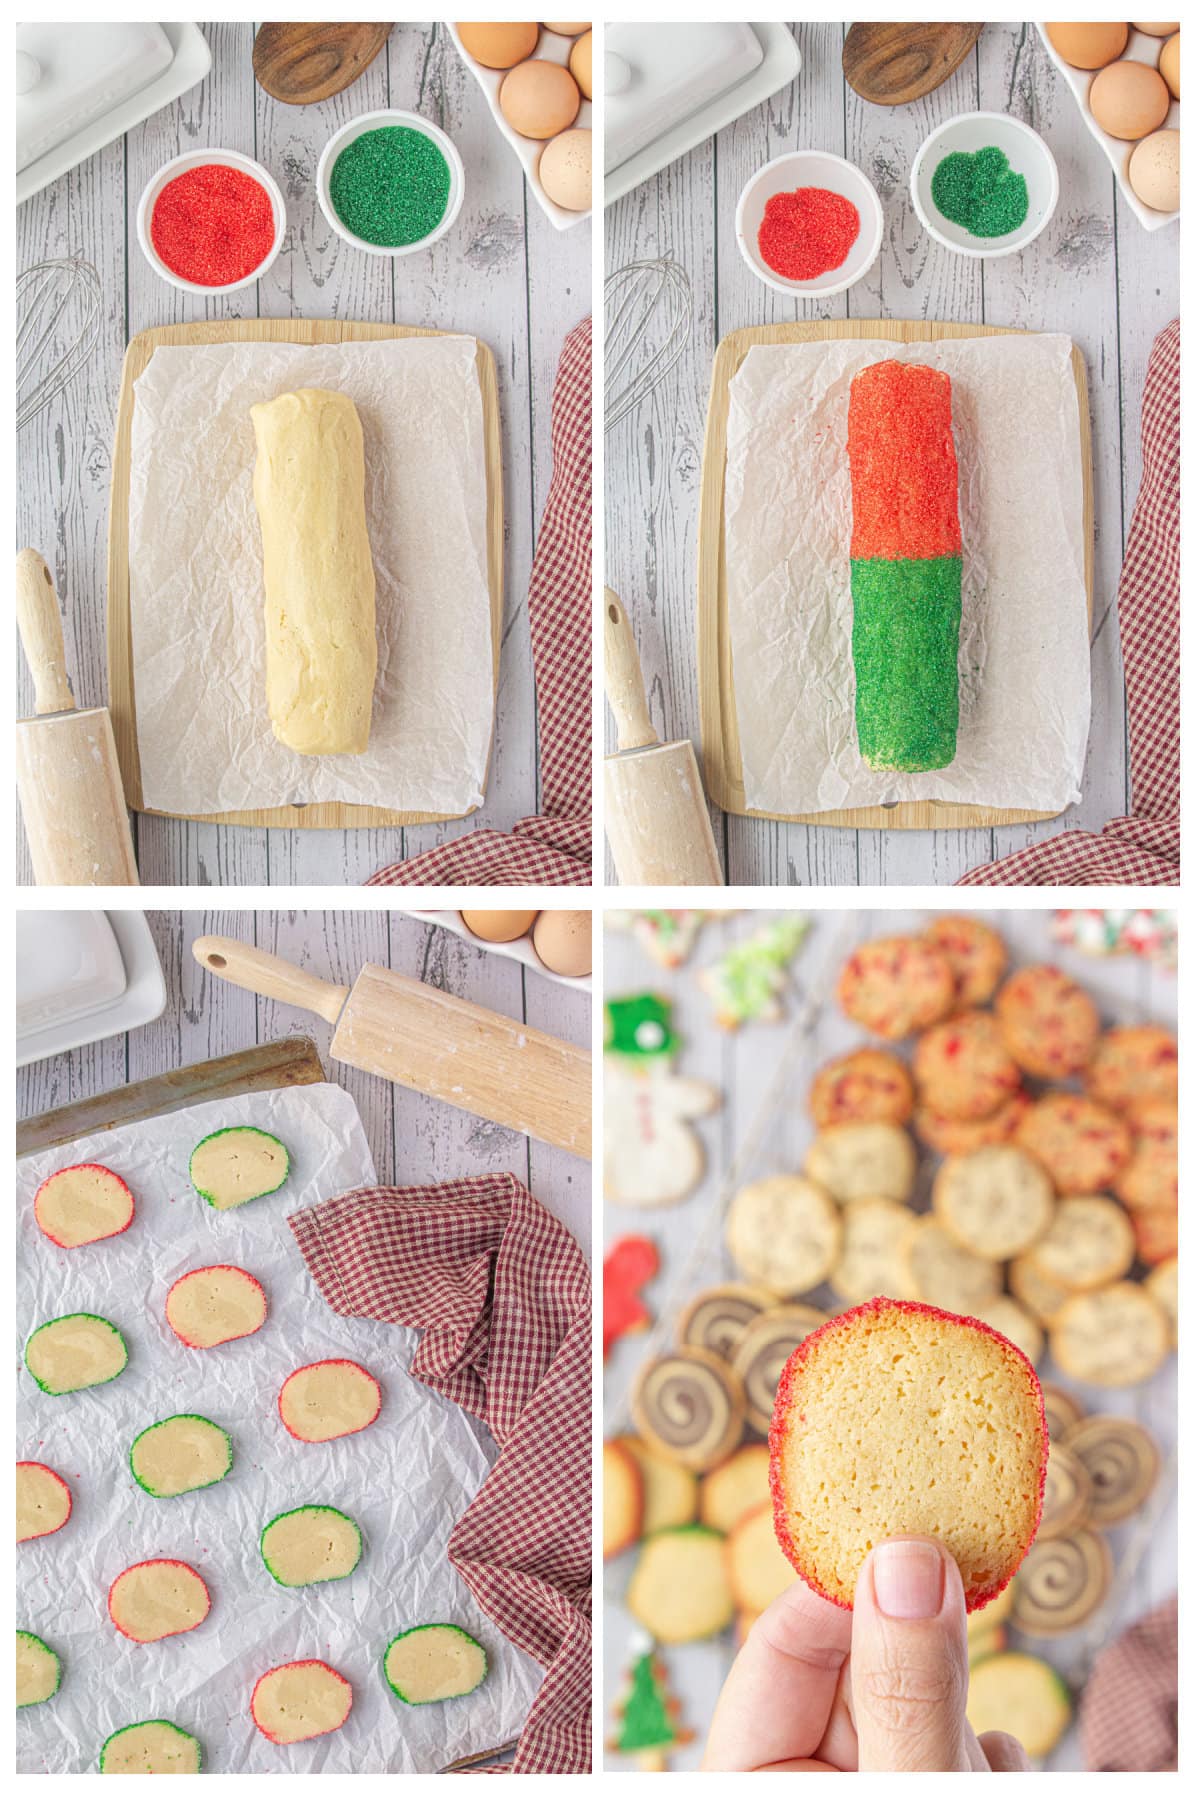 Four overhead images showing how to add colorful sugar crystals to the edges of sugar cookies.